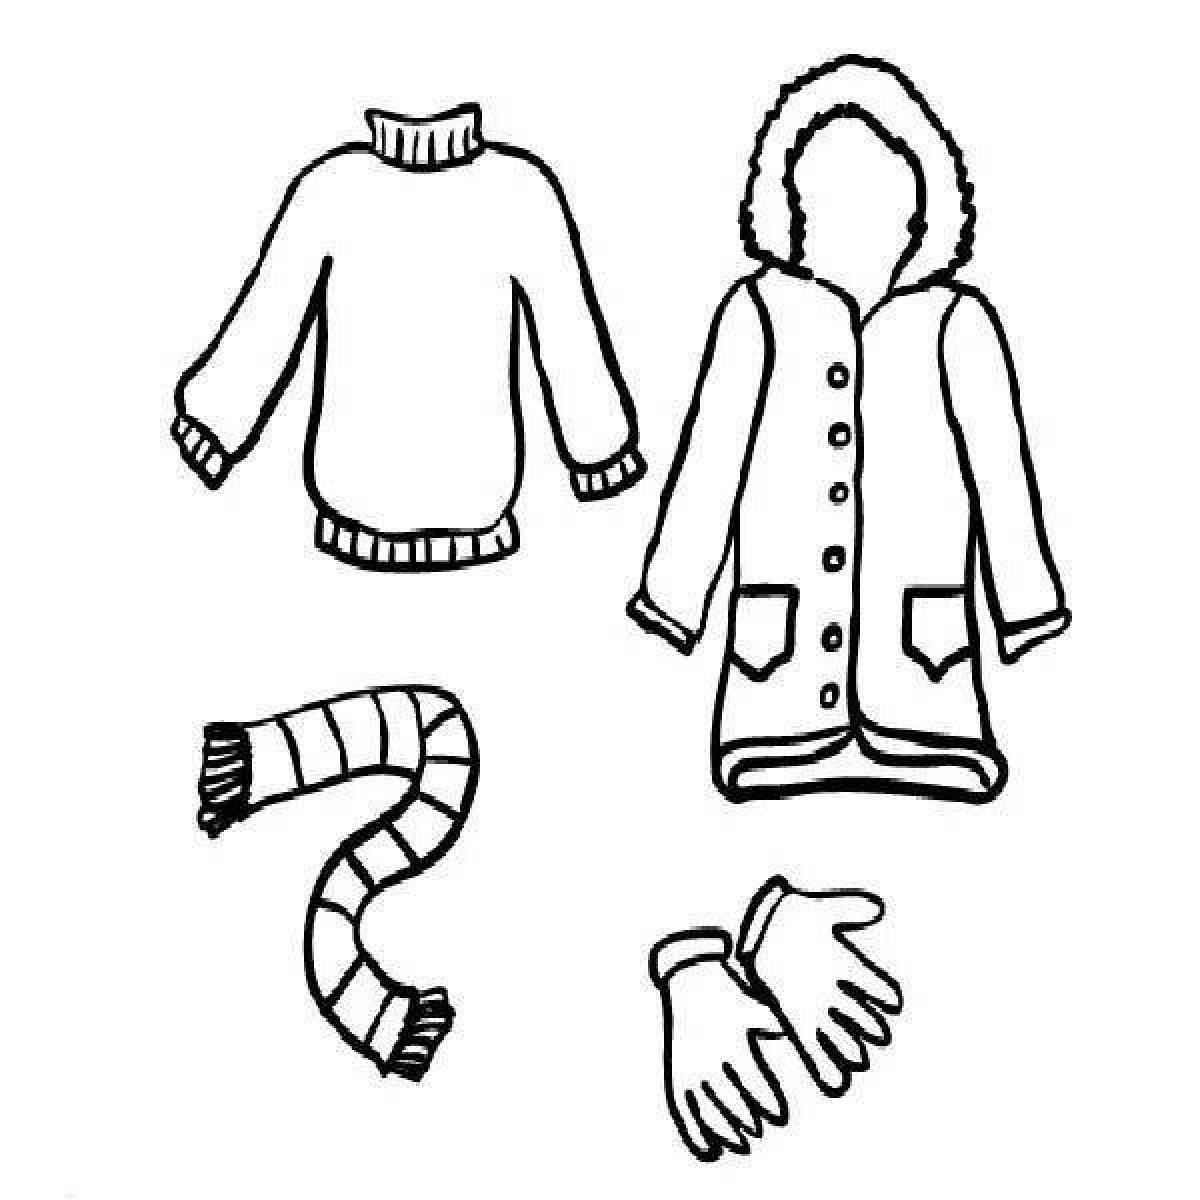 Coloured sparkling winter clothes for preschoolers coloring book